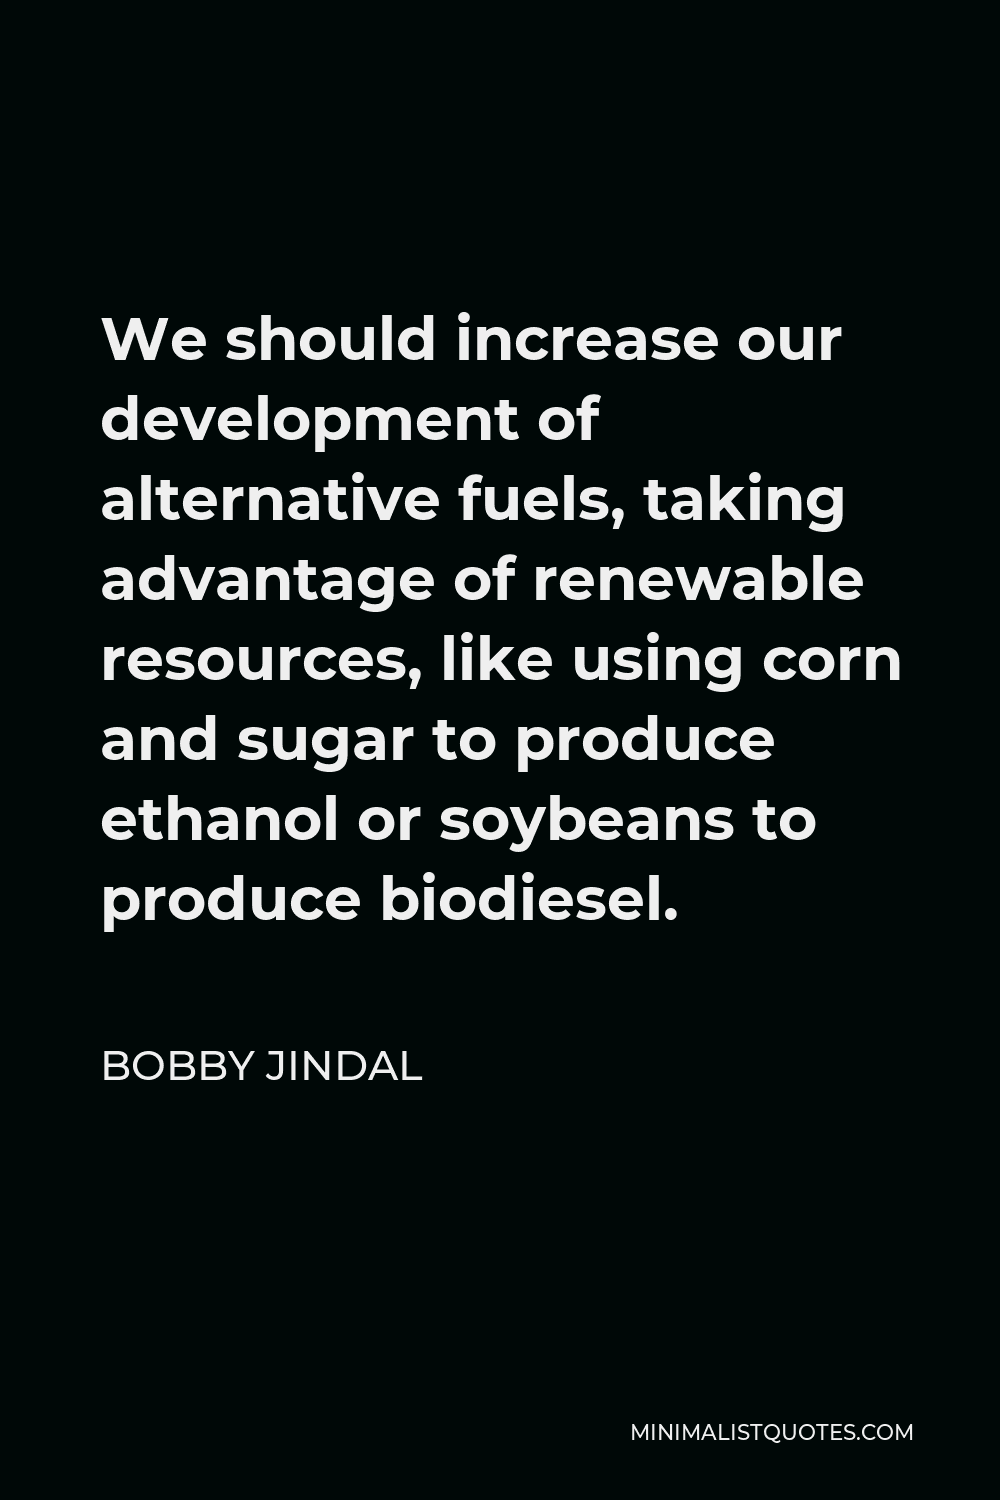 Bobby Jindal Quote - We should increase our development of alternative fuels, taking advantage of renewable resources, like using corn and sugar to produce ethanol or soybeans to produce biodiesel.